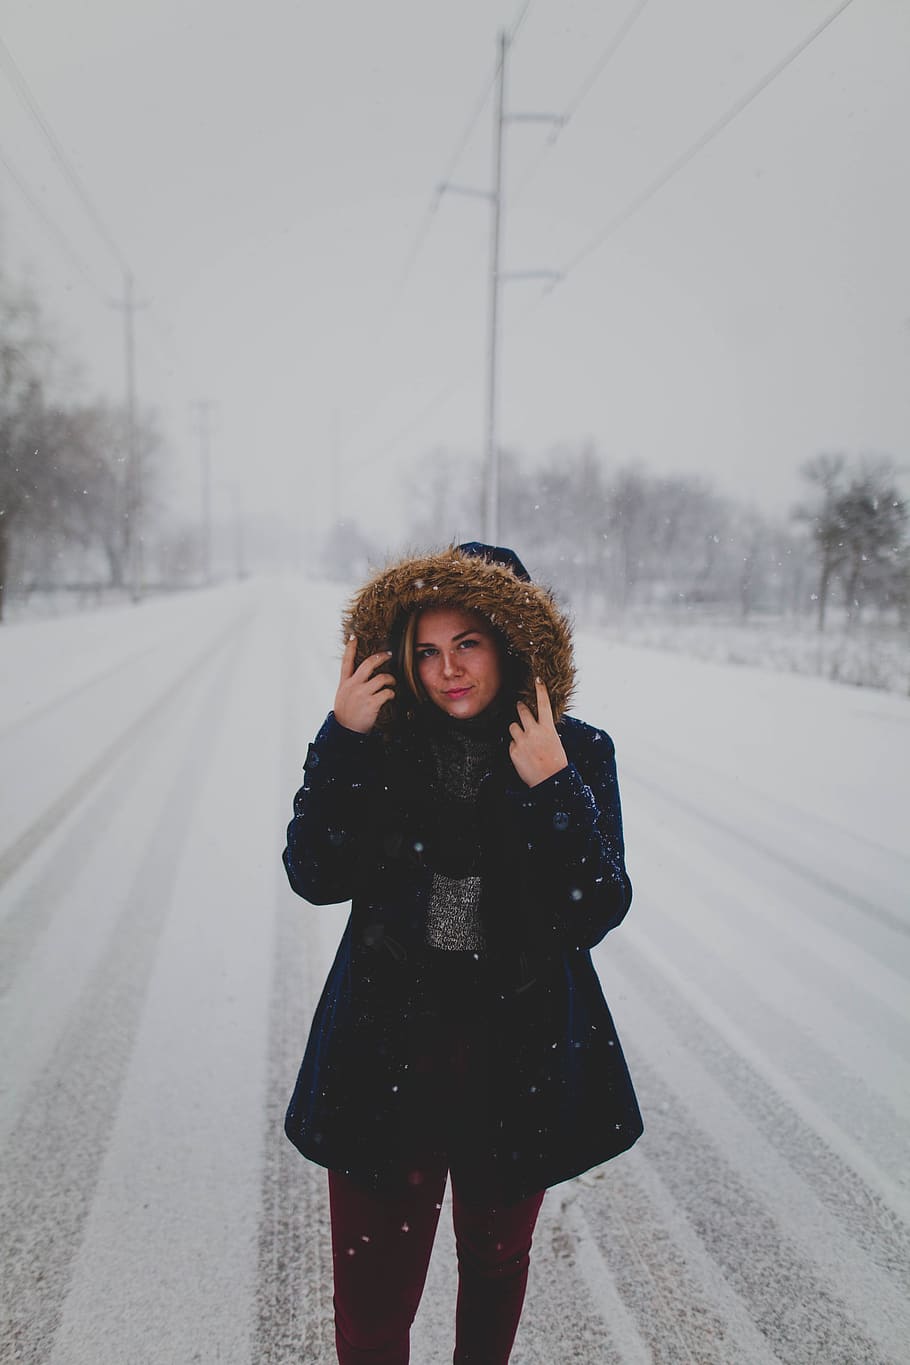 road, path, snow, winter, people, woman, girl, clothing, outdoor, travel